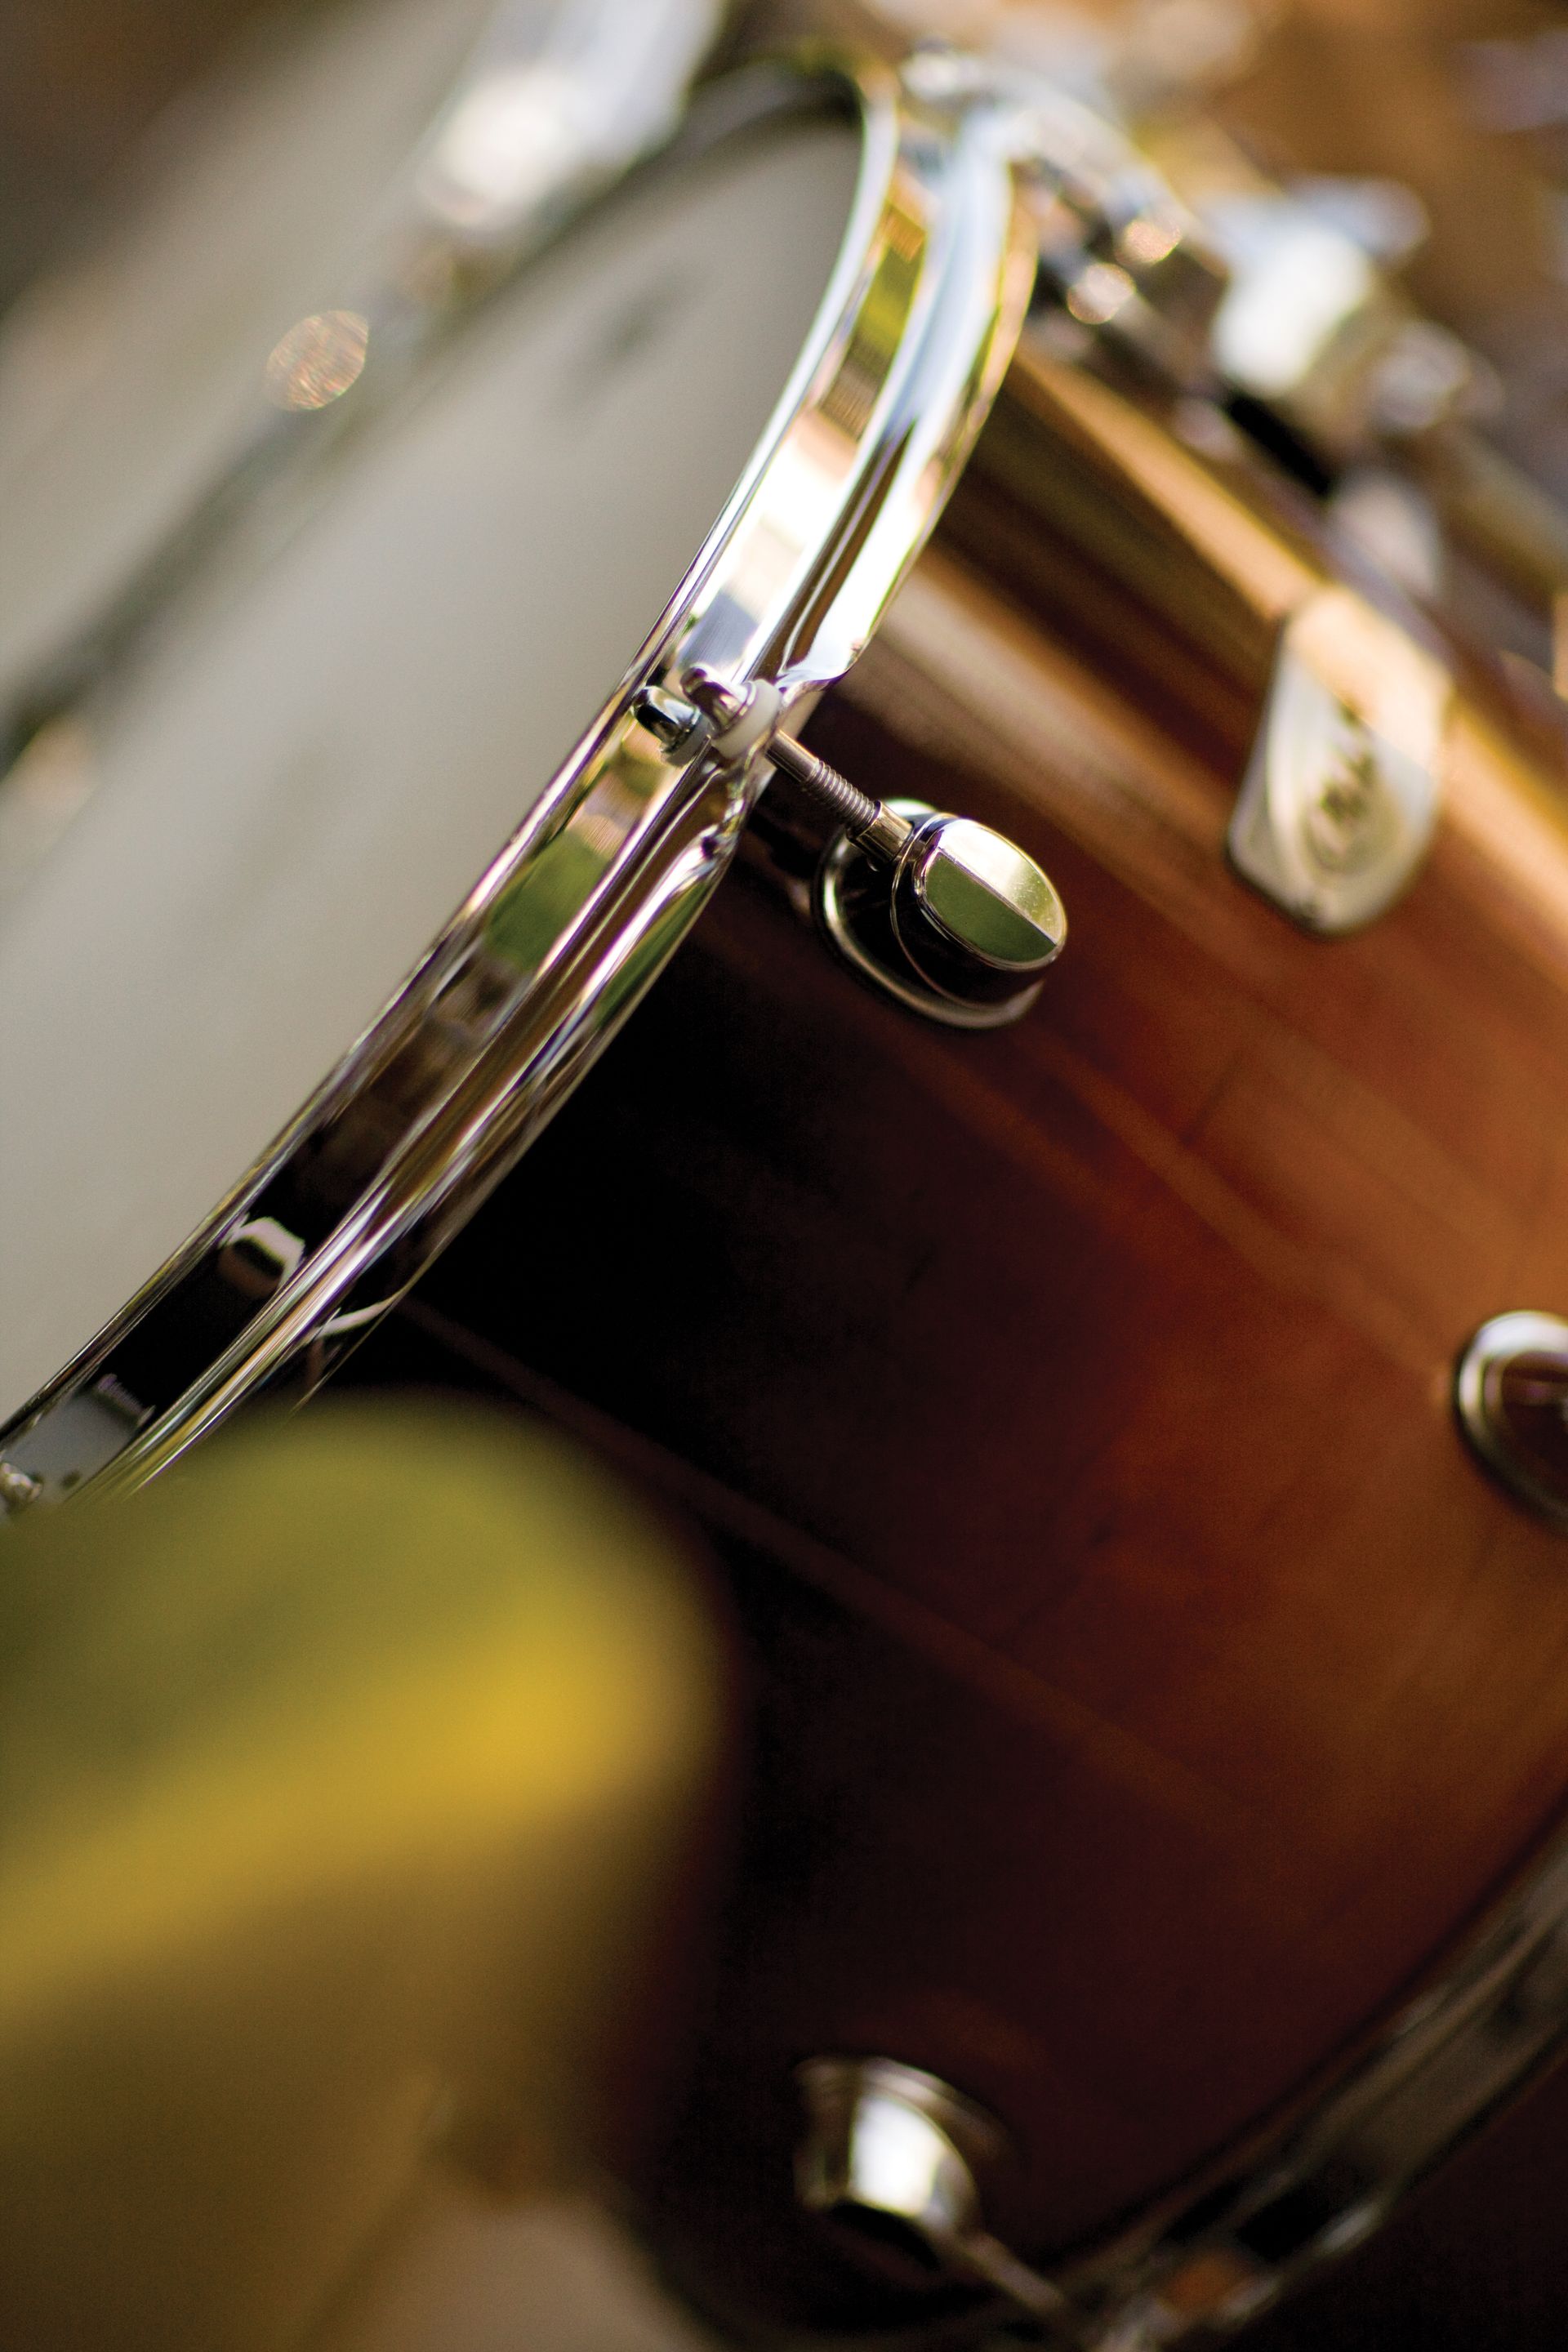 An image of drums.